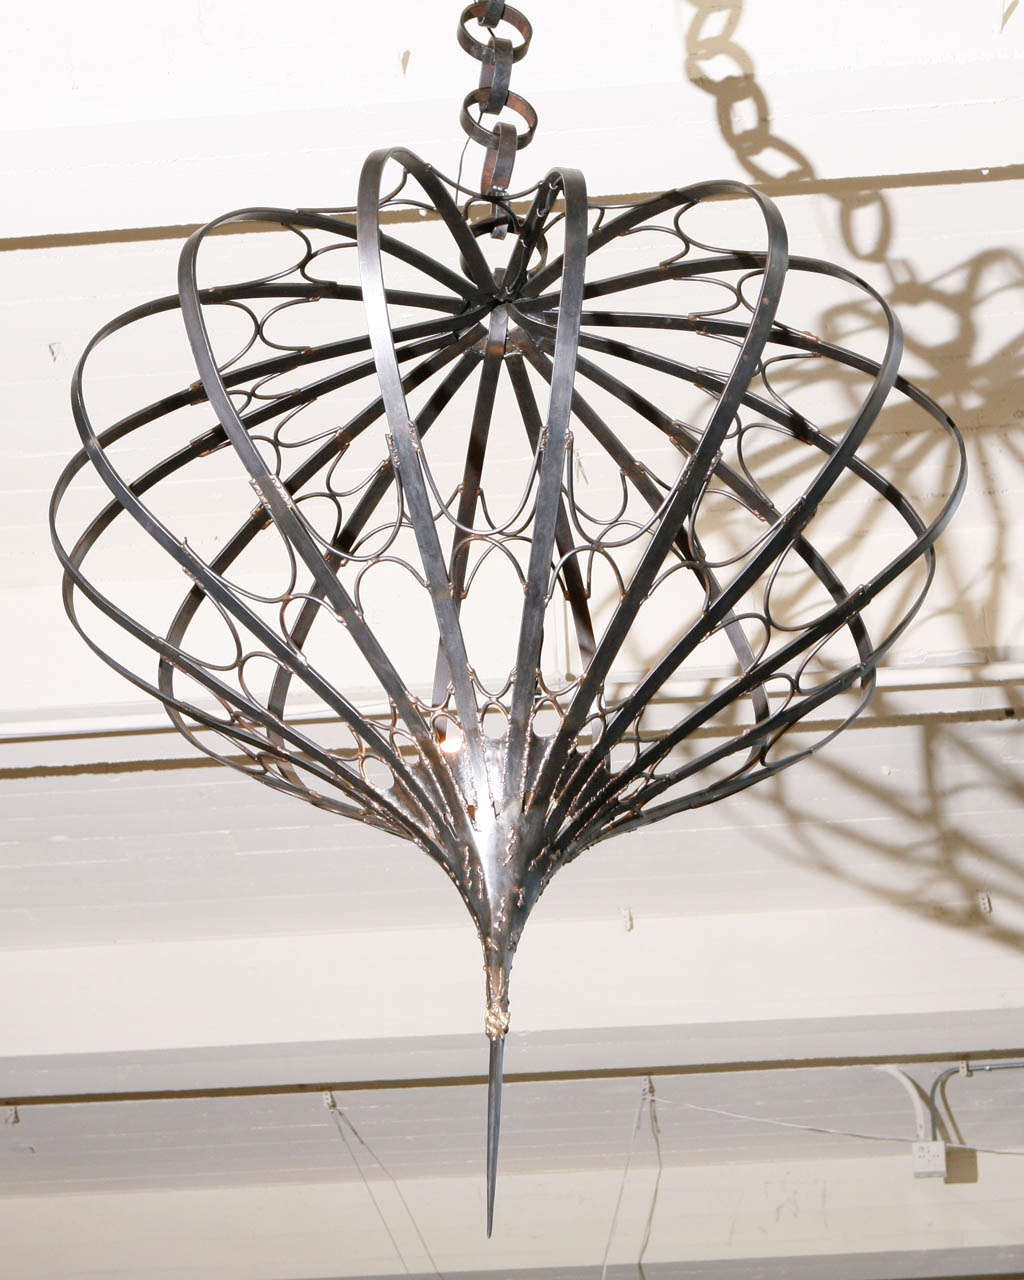 Michael Wilson metal ceiling light.
Measurement does not include chain.